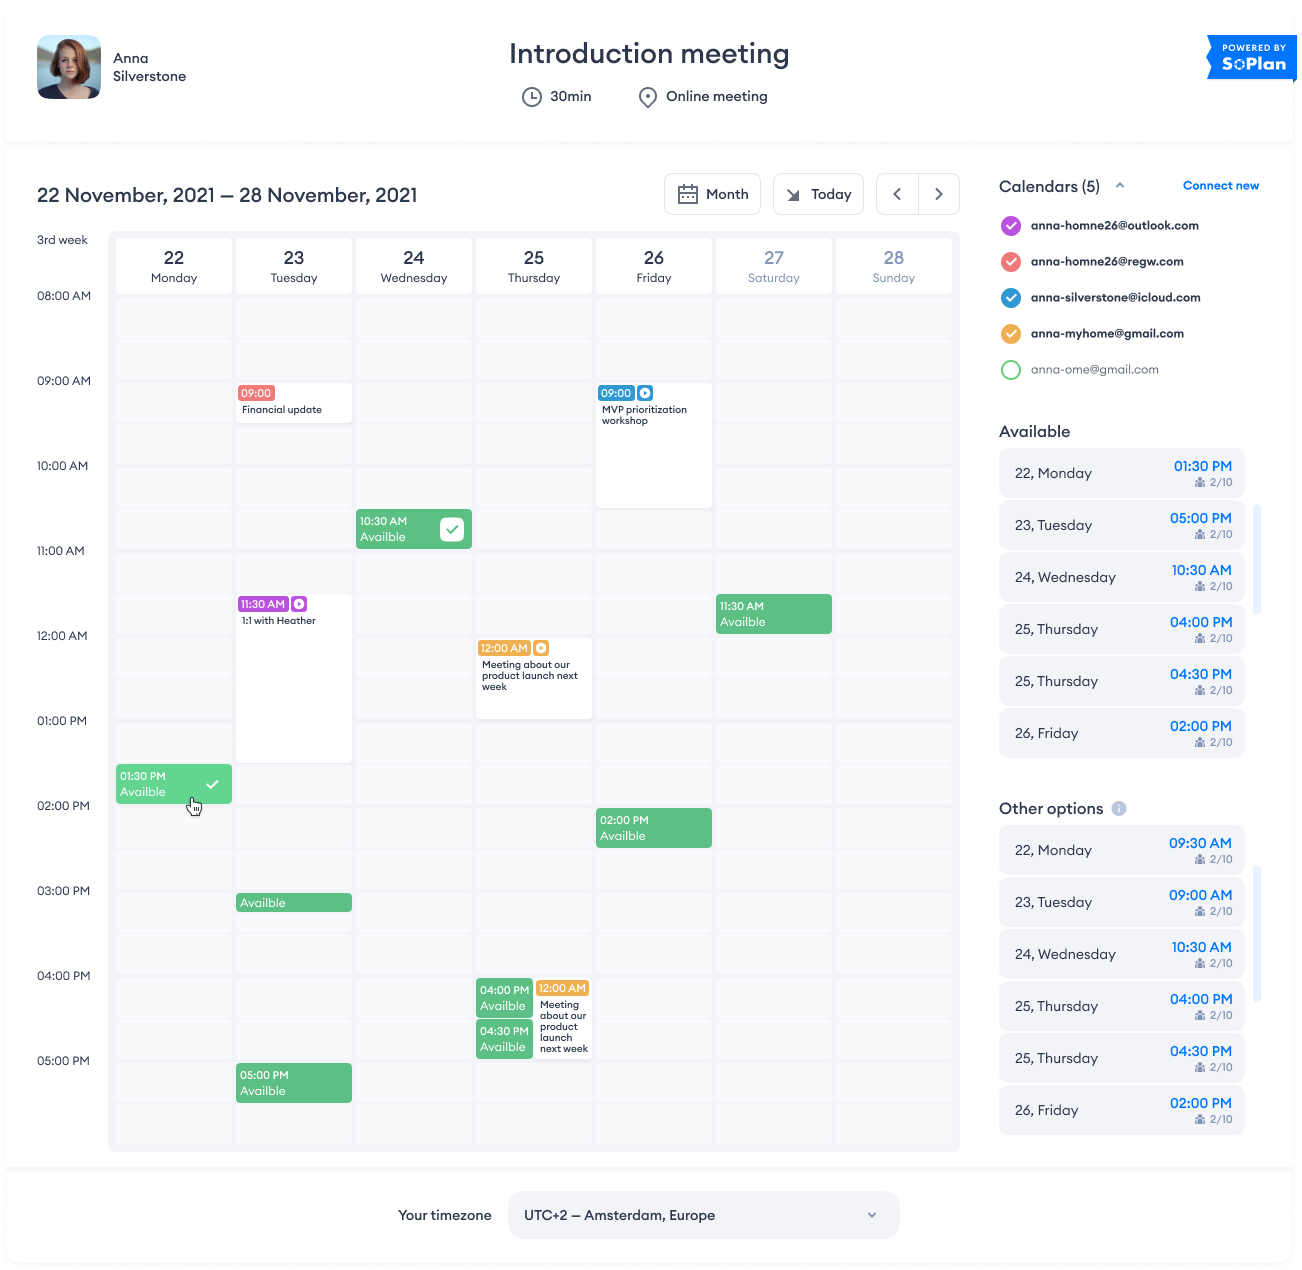 Easy calendar overview where customers can overlay their own calendar for finding mutual availability easier